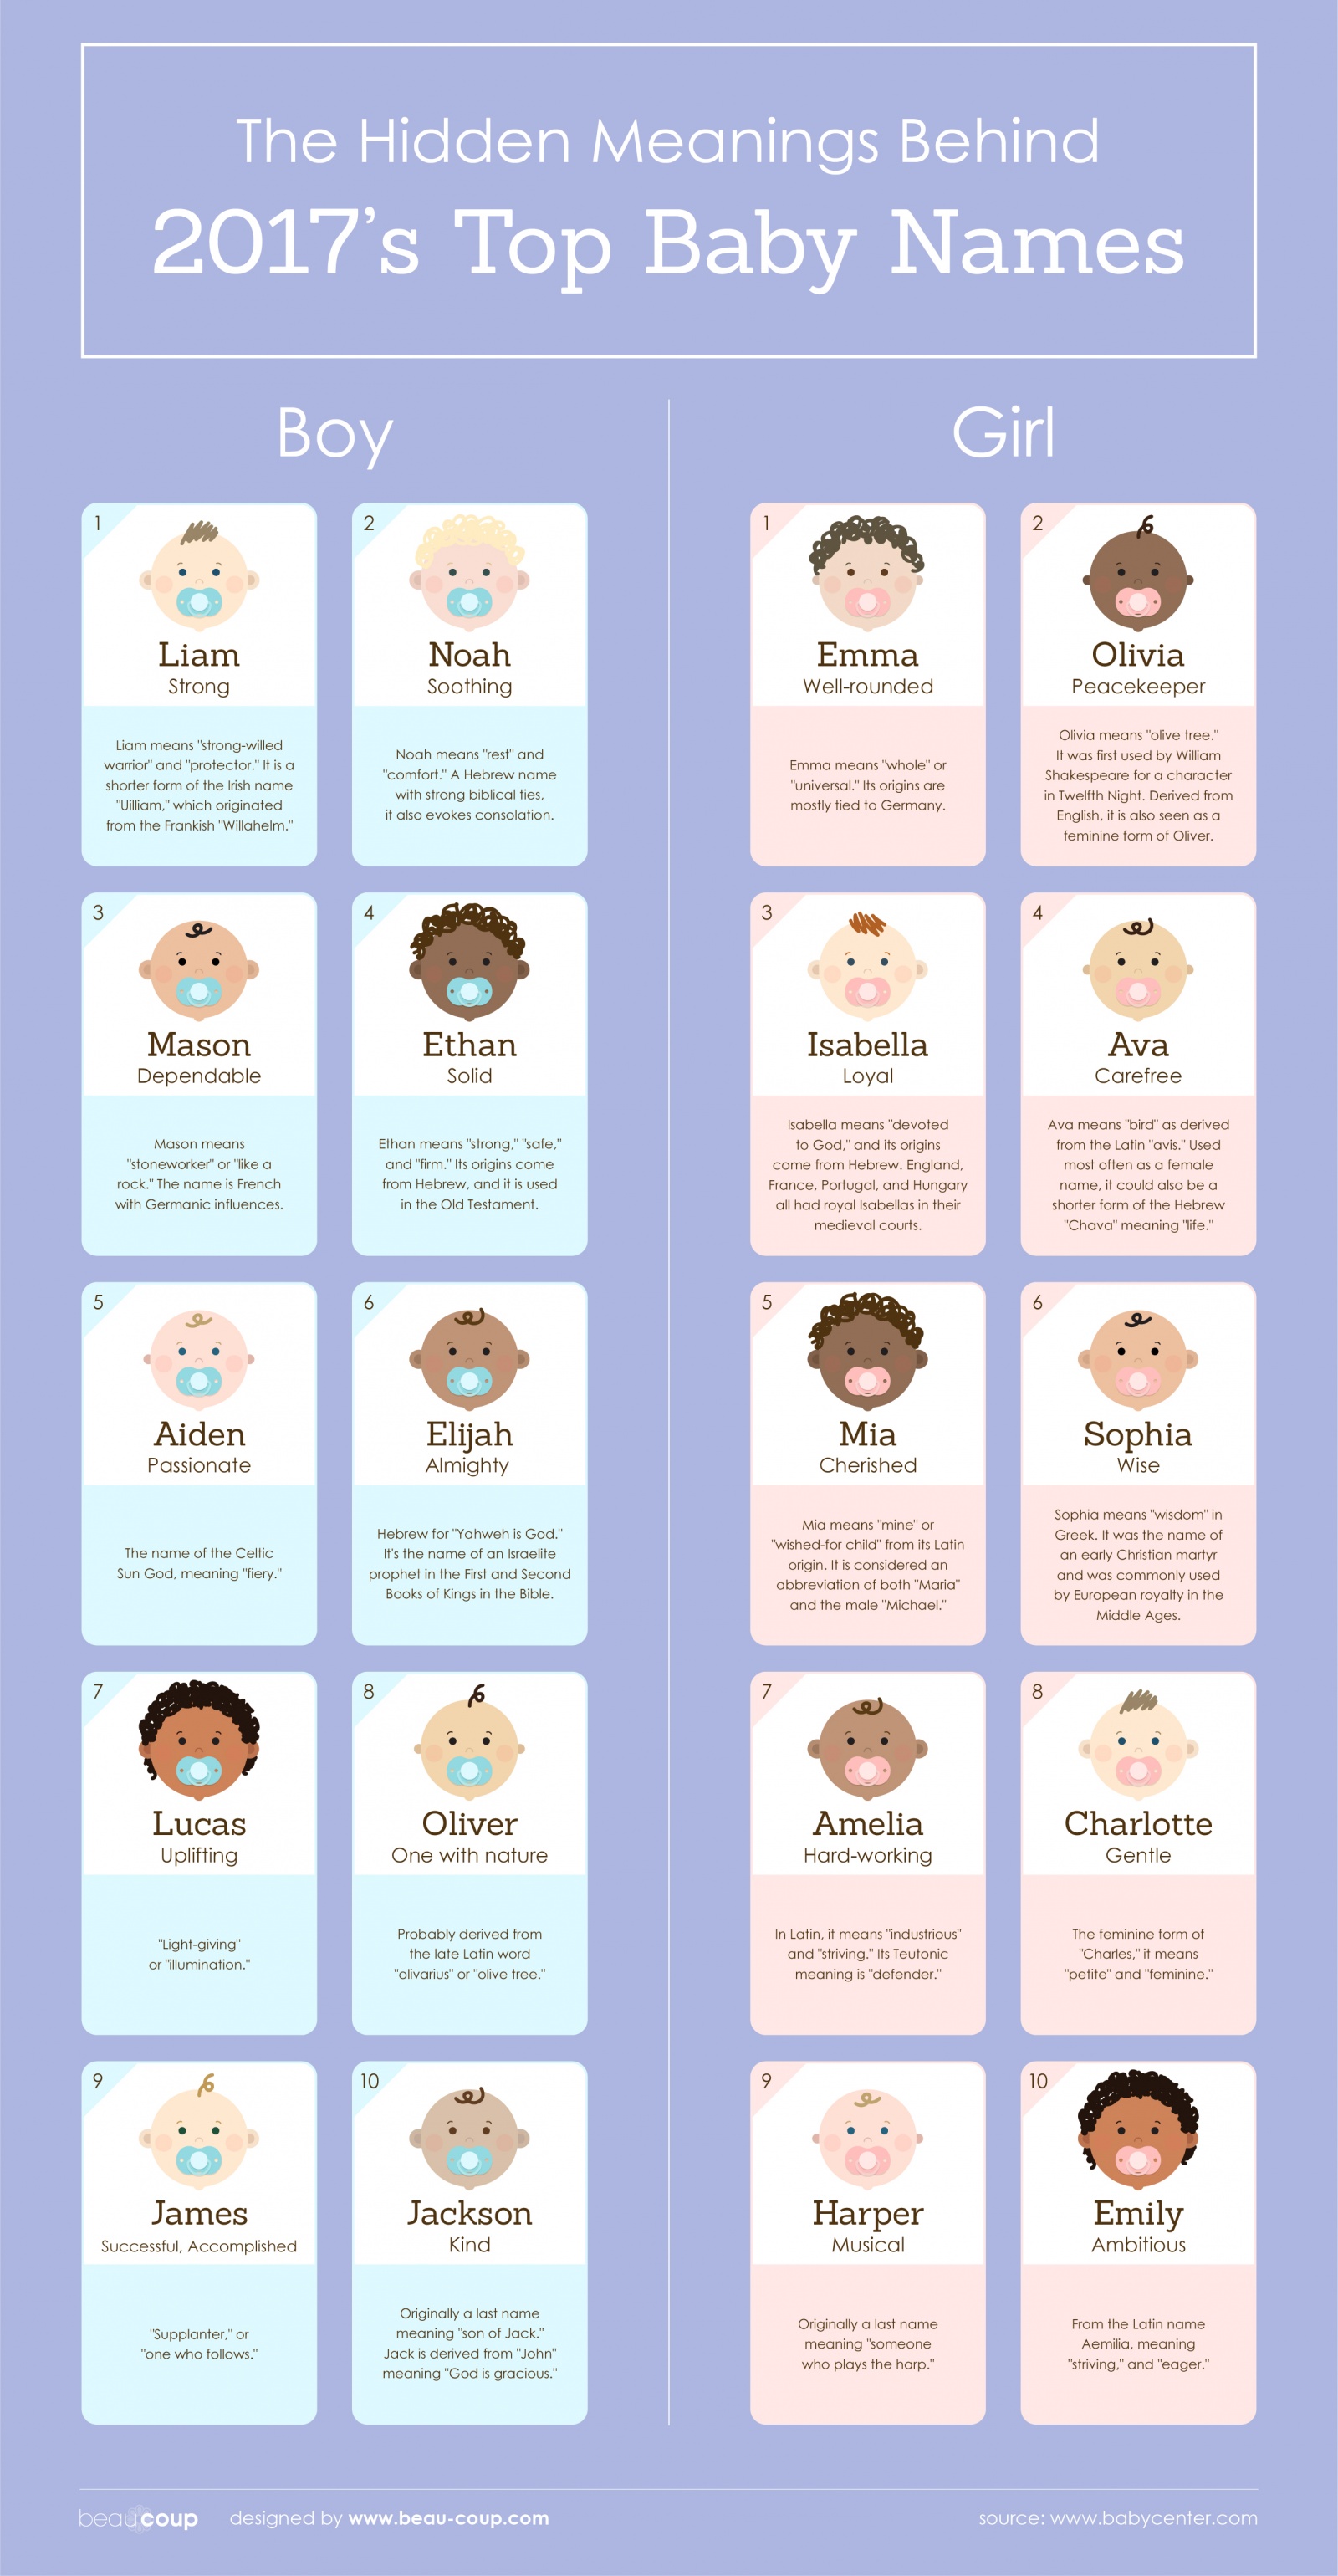 top baby names, baby names, infographic, 2017 top baby names, top baby names of 2017, meanings behind names, baby name meanings, name meanings, top names, top 2017 names, meanings of names, meaning of baby names, baby names 2017 